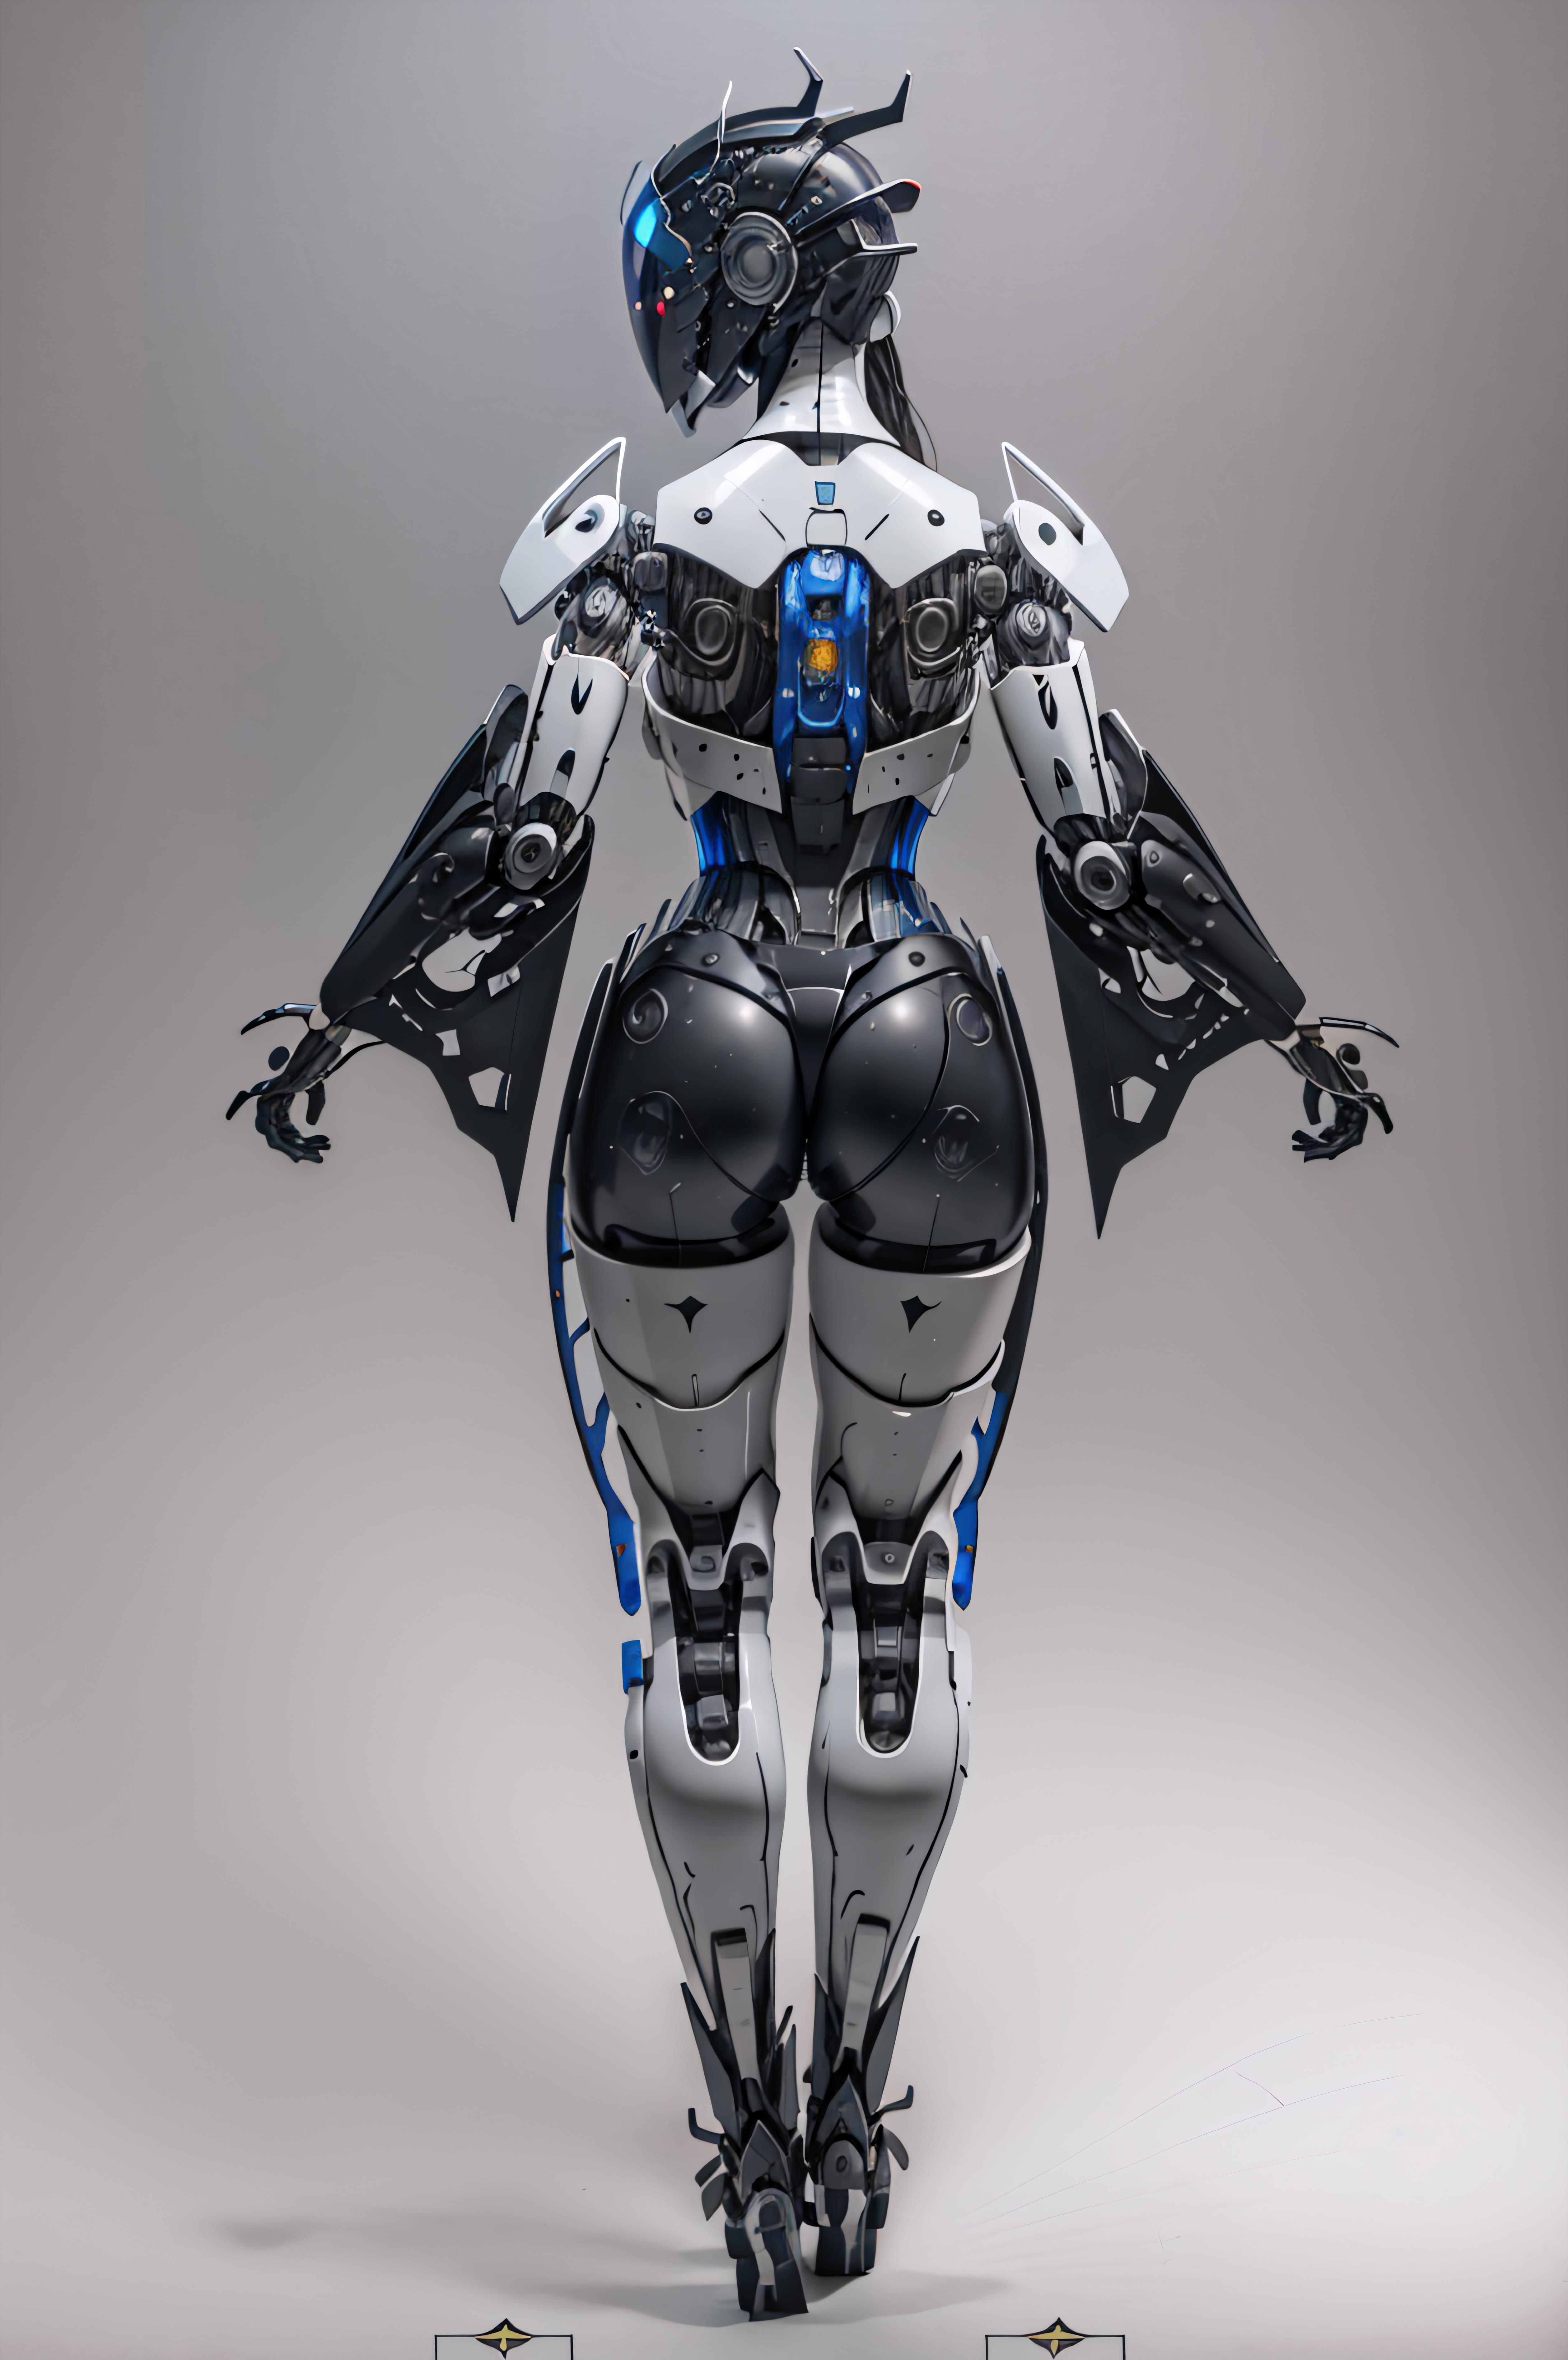 Futuristic Robot Assistant with Blue Winged Design and Black Wings on Back